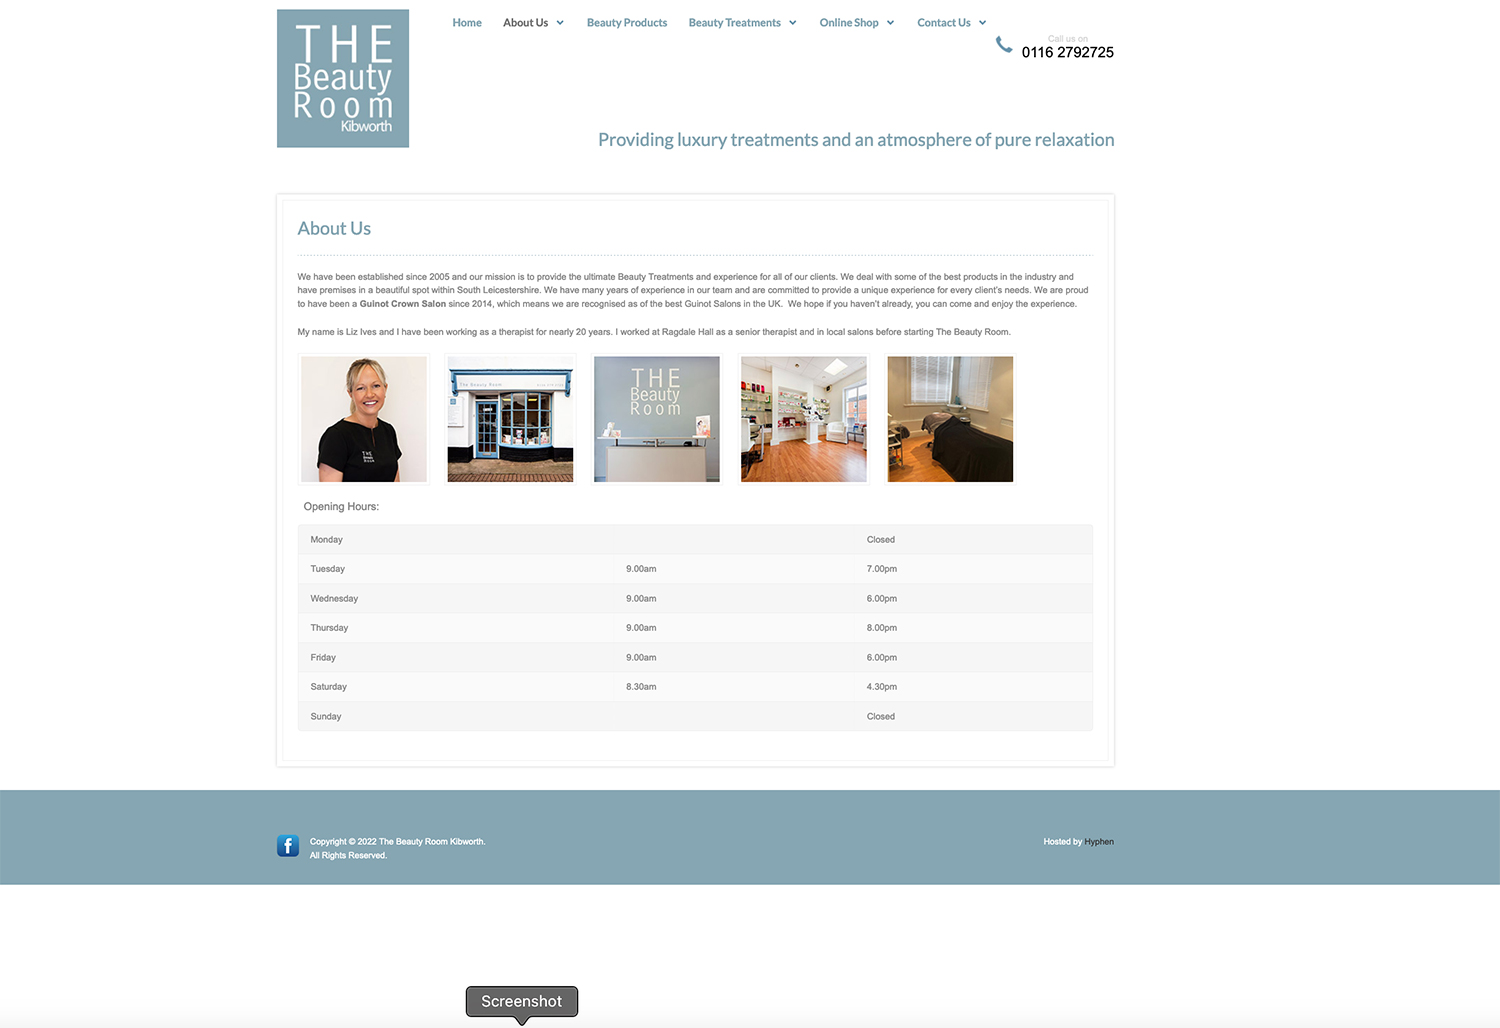 The Beauty Room New website about us page, designed, built and hosted by Hyphen